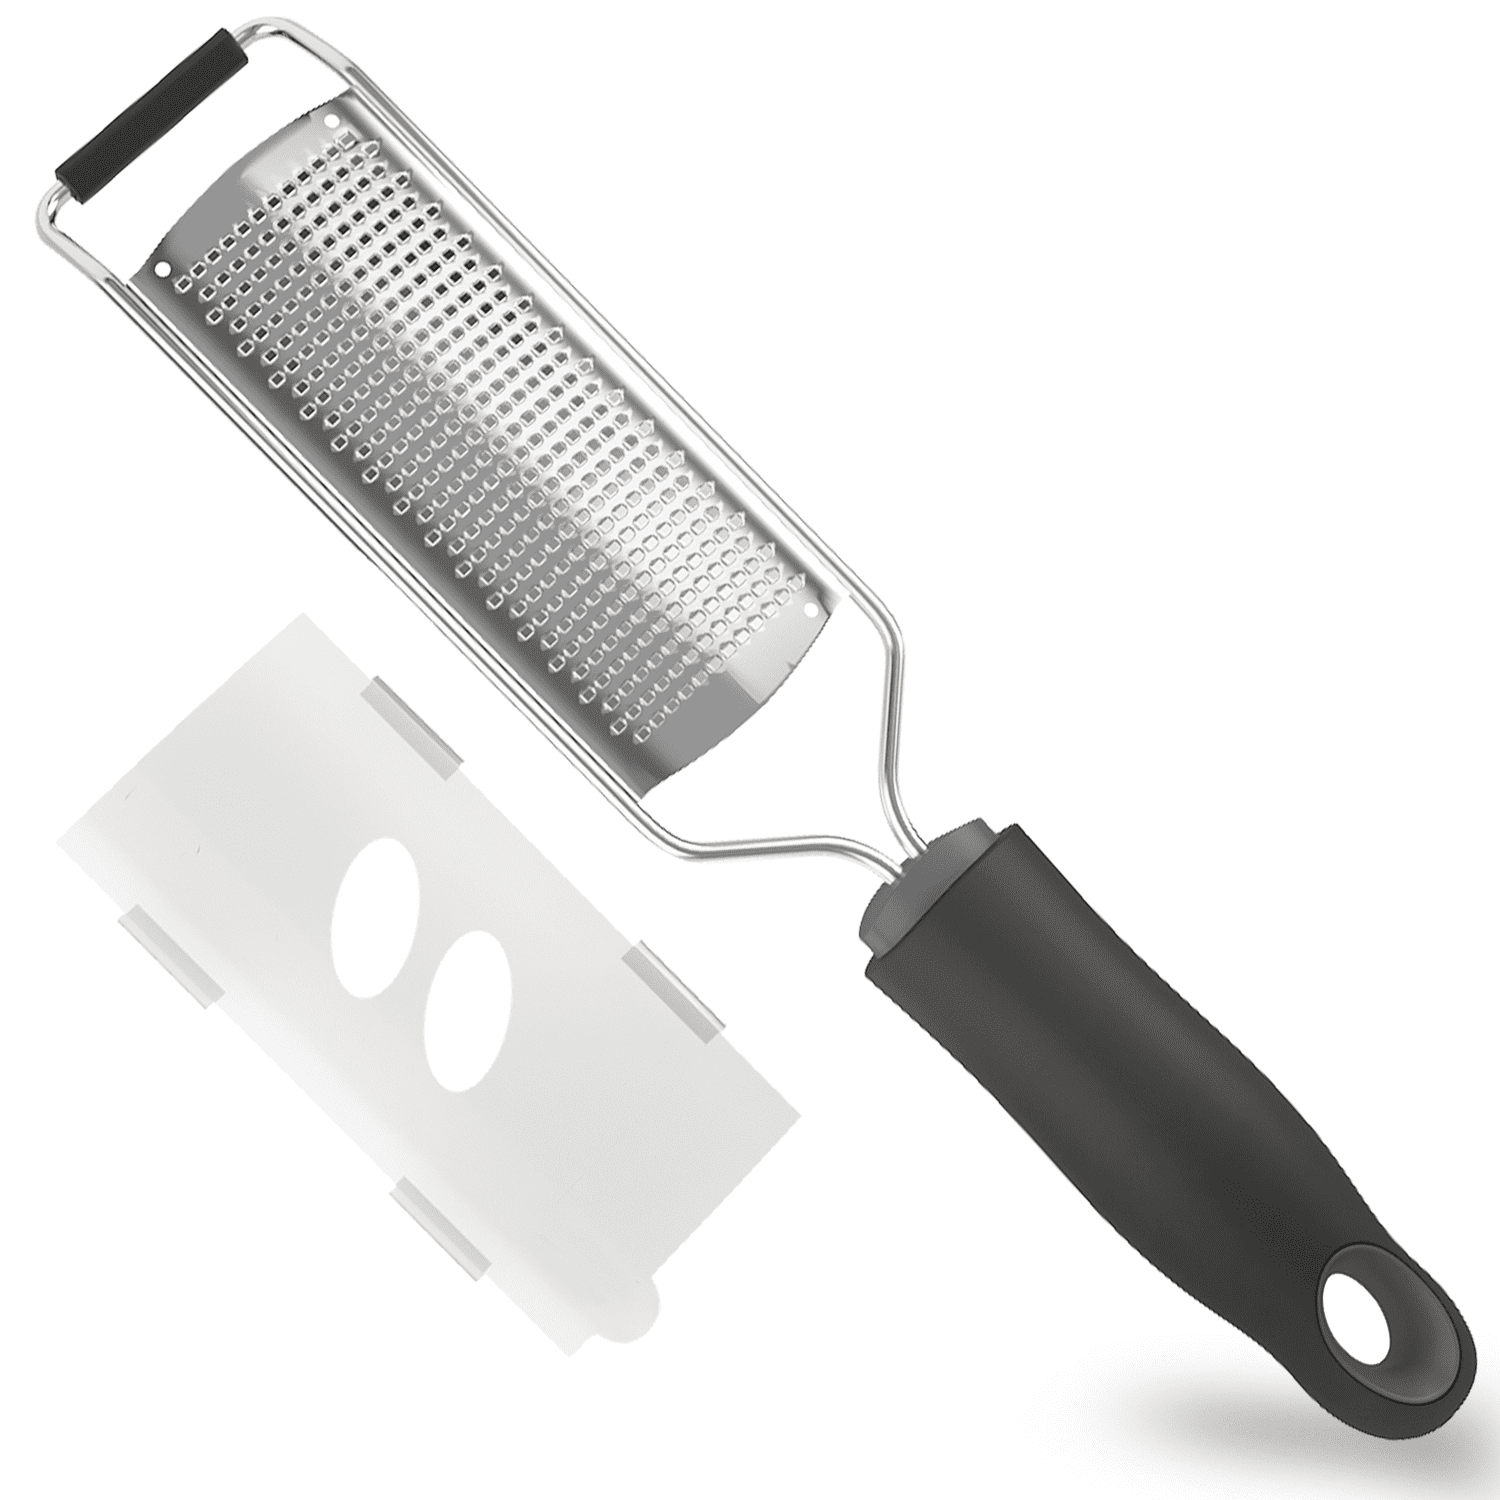 CHUANK Stainless Steel Handheld Cheese Grater – Comfort Non-Slip Handle and  Razor Sharp Blades – Easily Grates All Types of Cheeses, Fruits